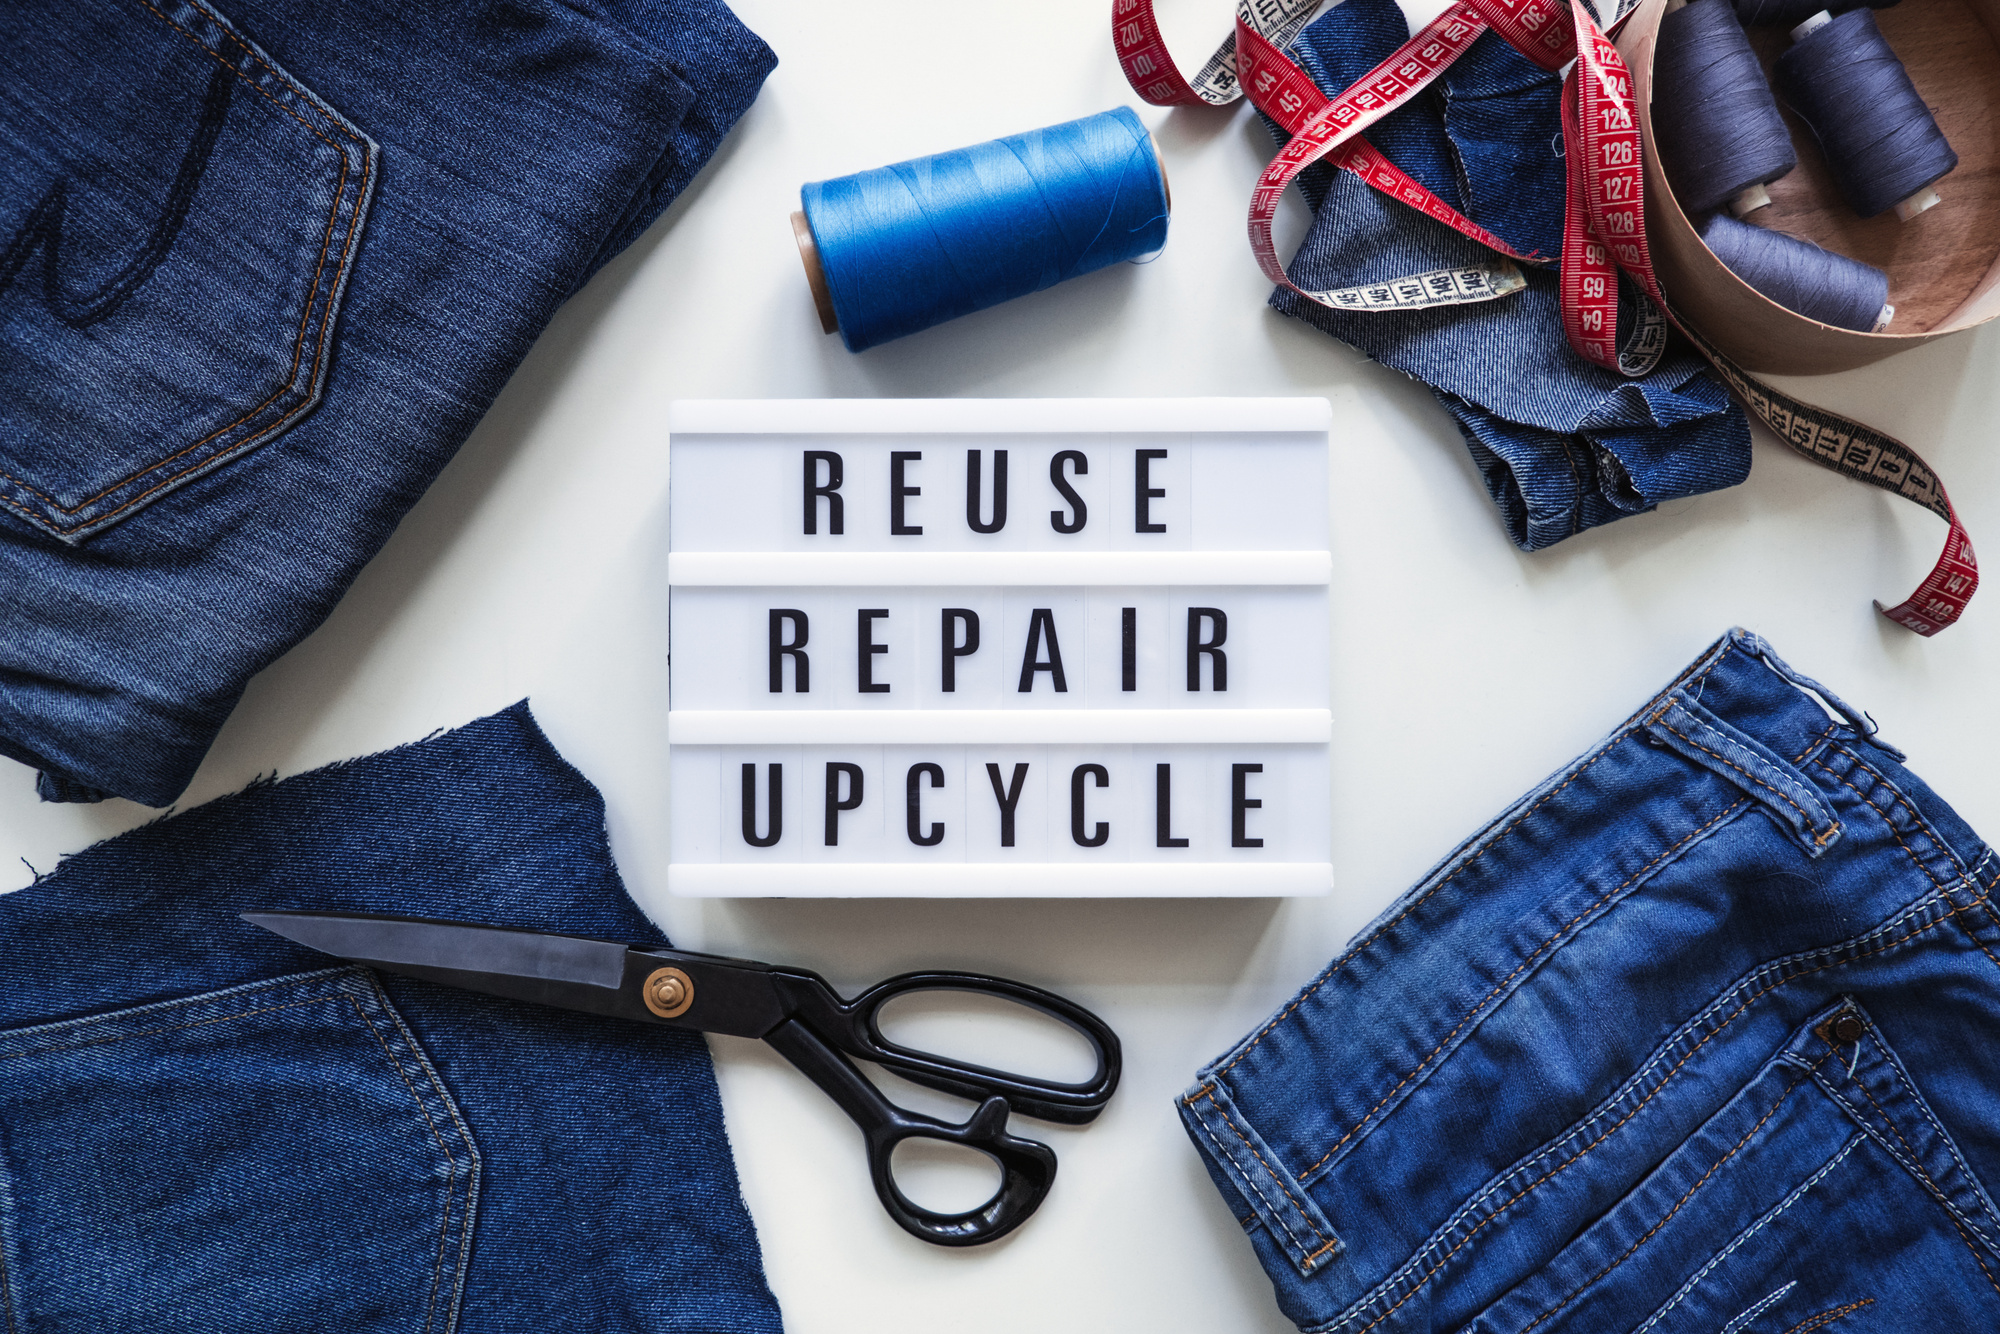 Reuse, Repair, and Upcycle Concept 